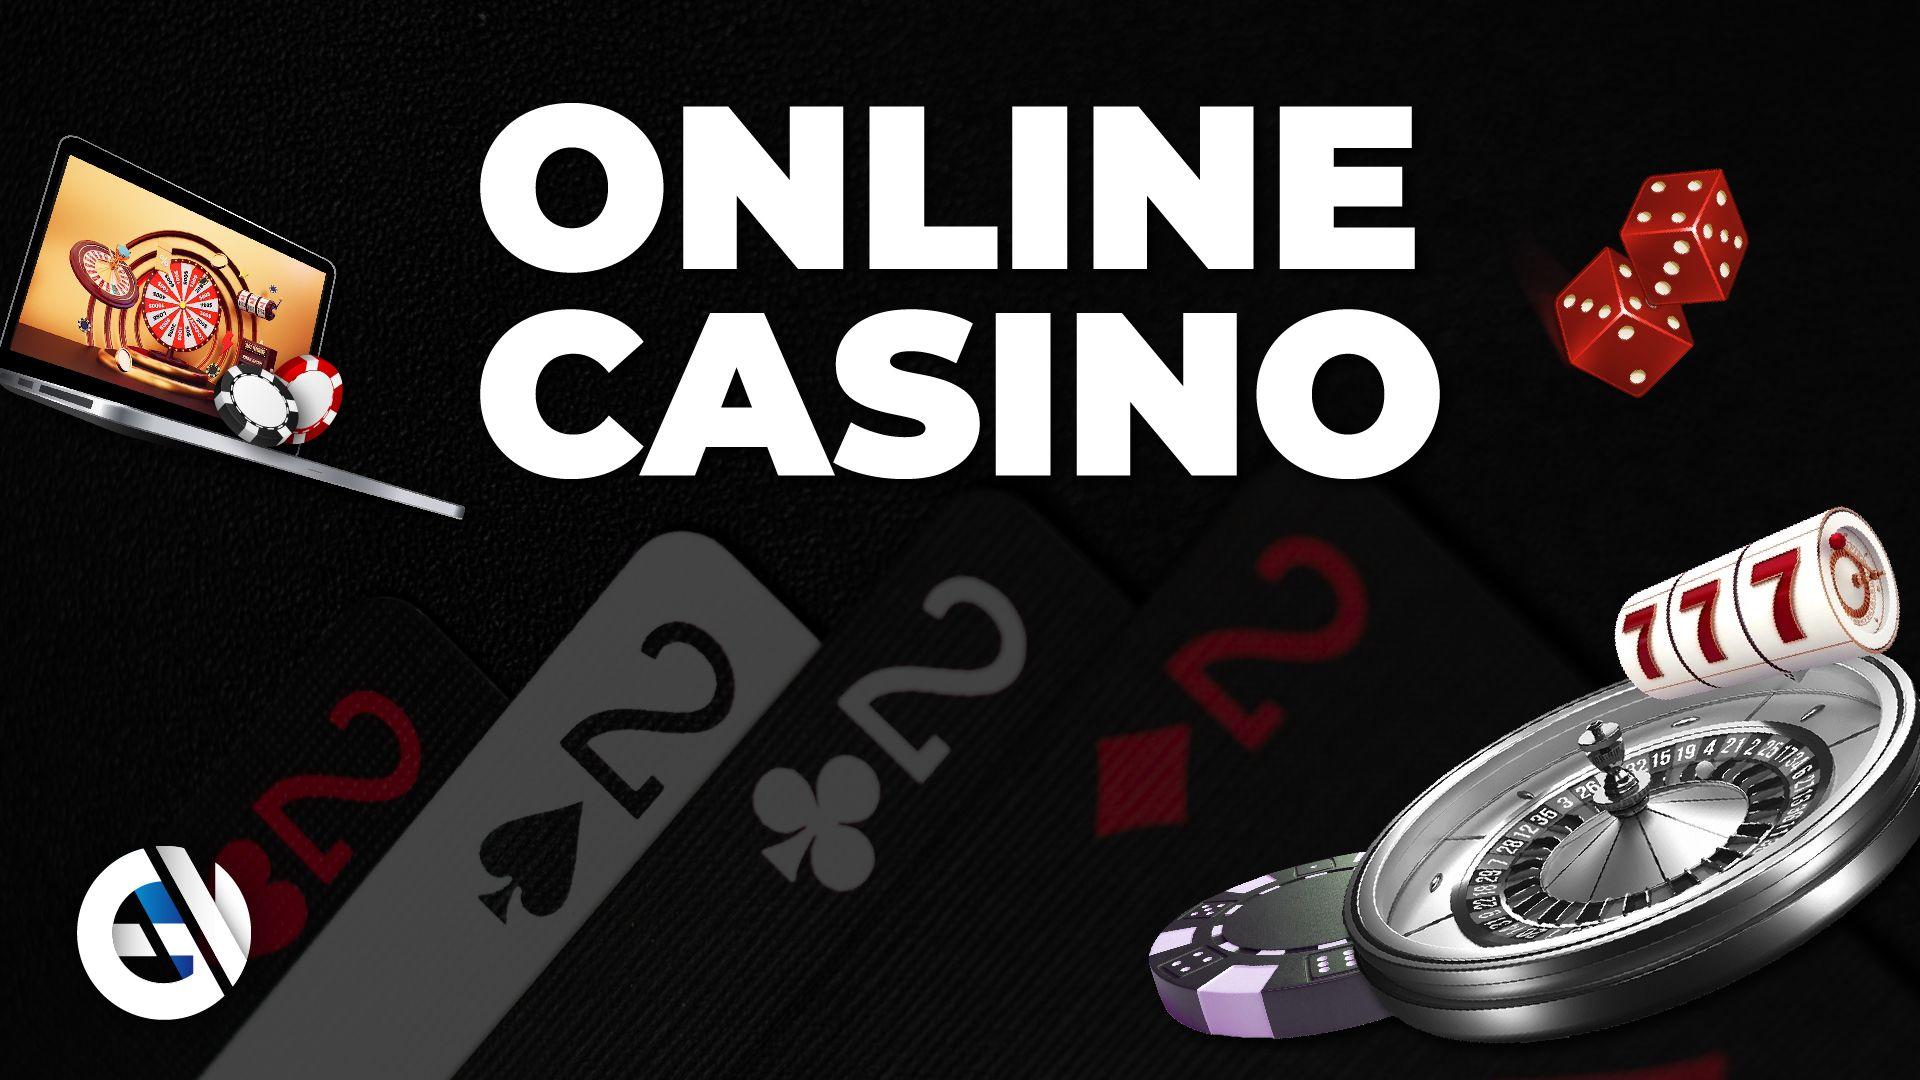 eGaming Casinos or Traditional Casinos - What Is the Difference?